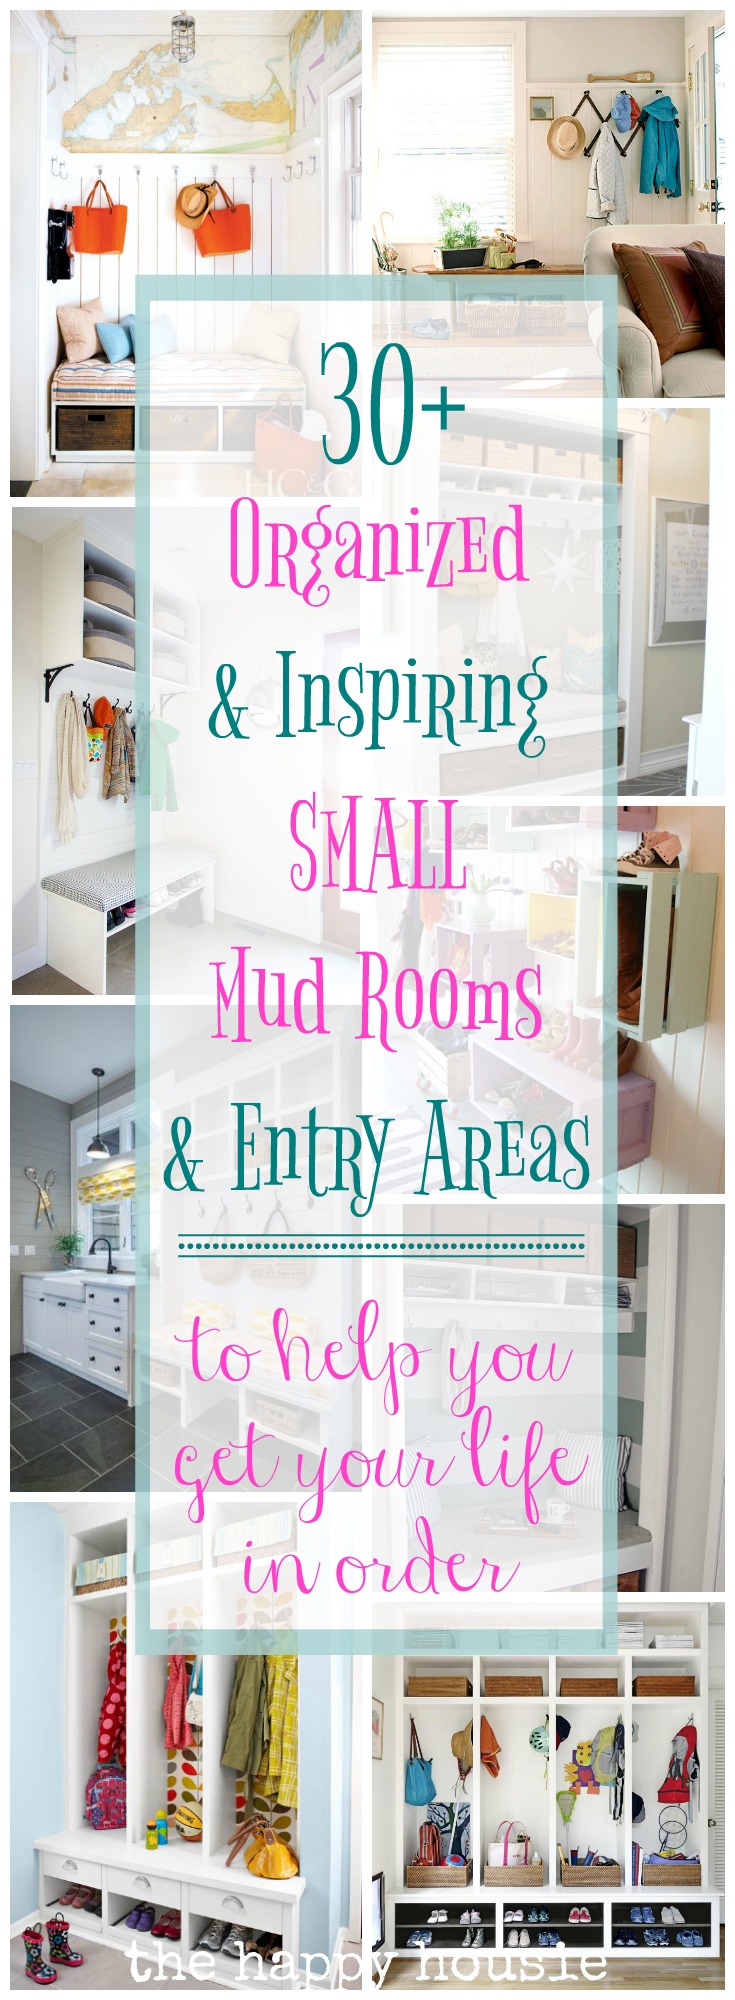 30 plus organized and inspiring small mud room and entry areas graphic.